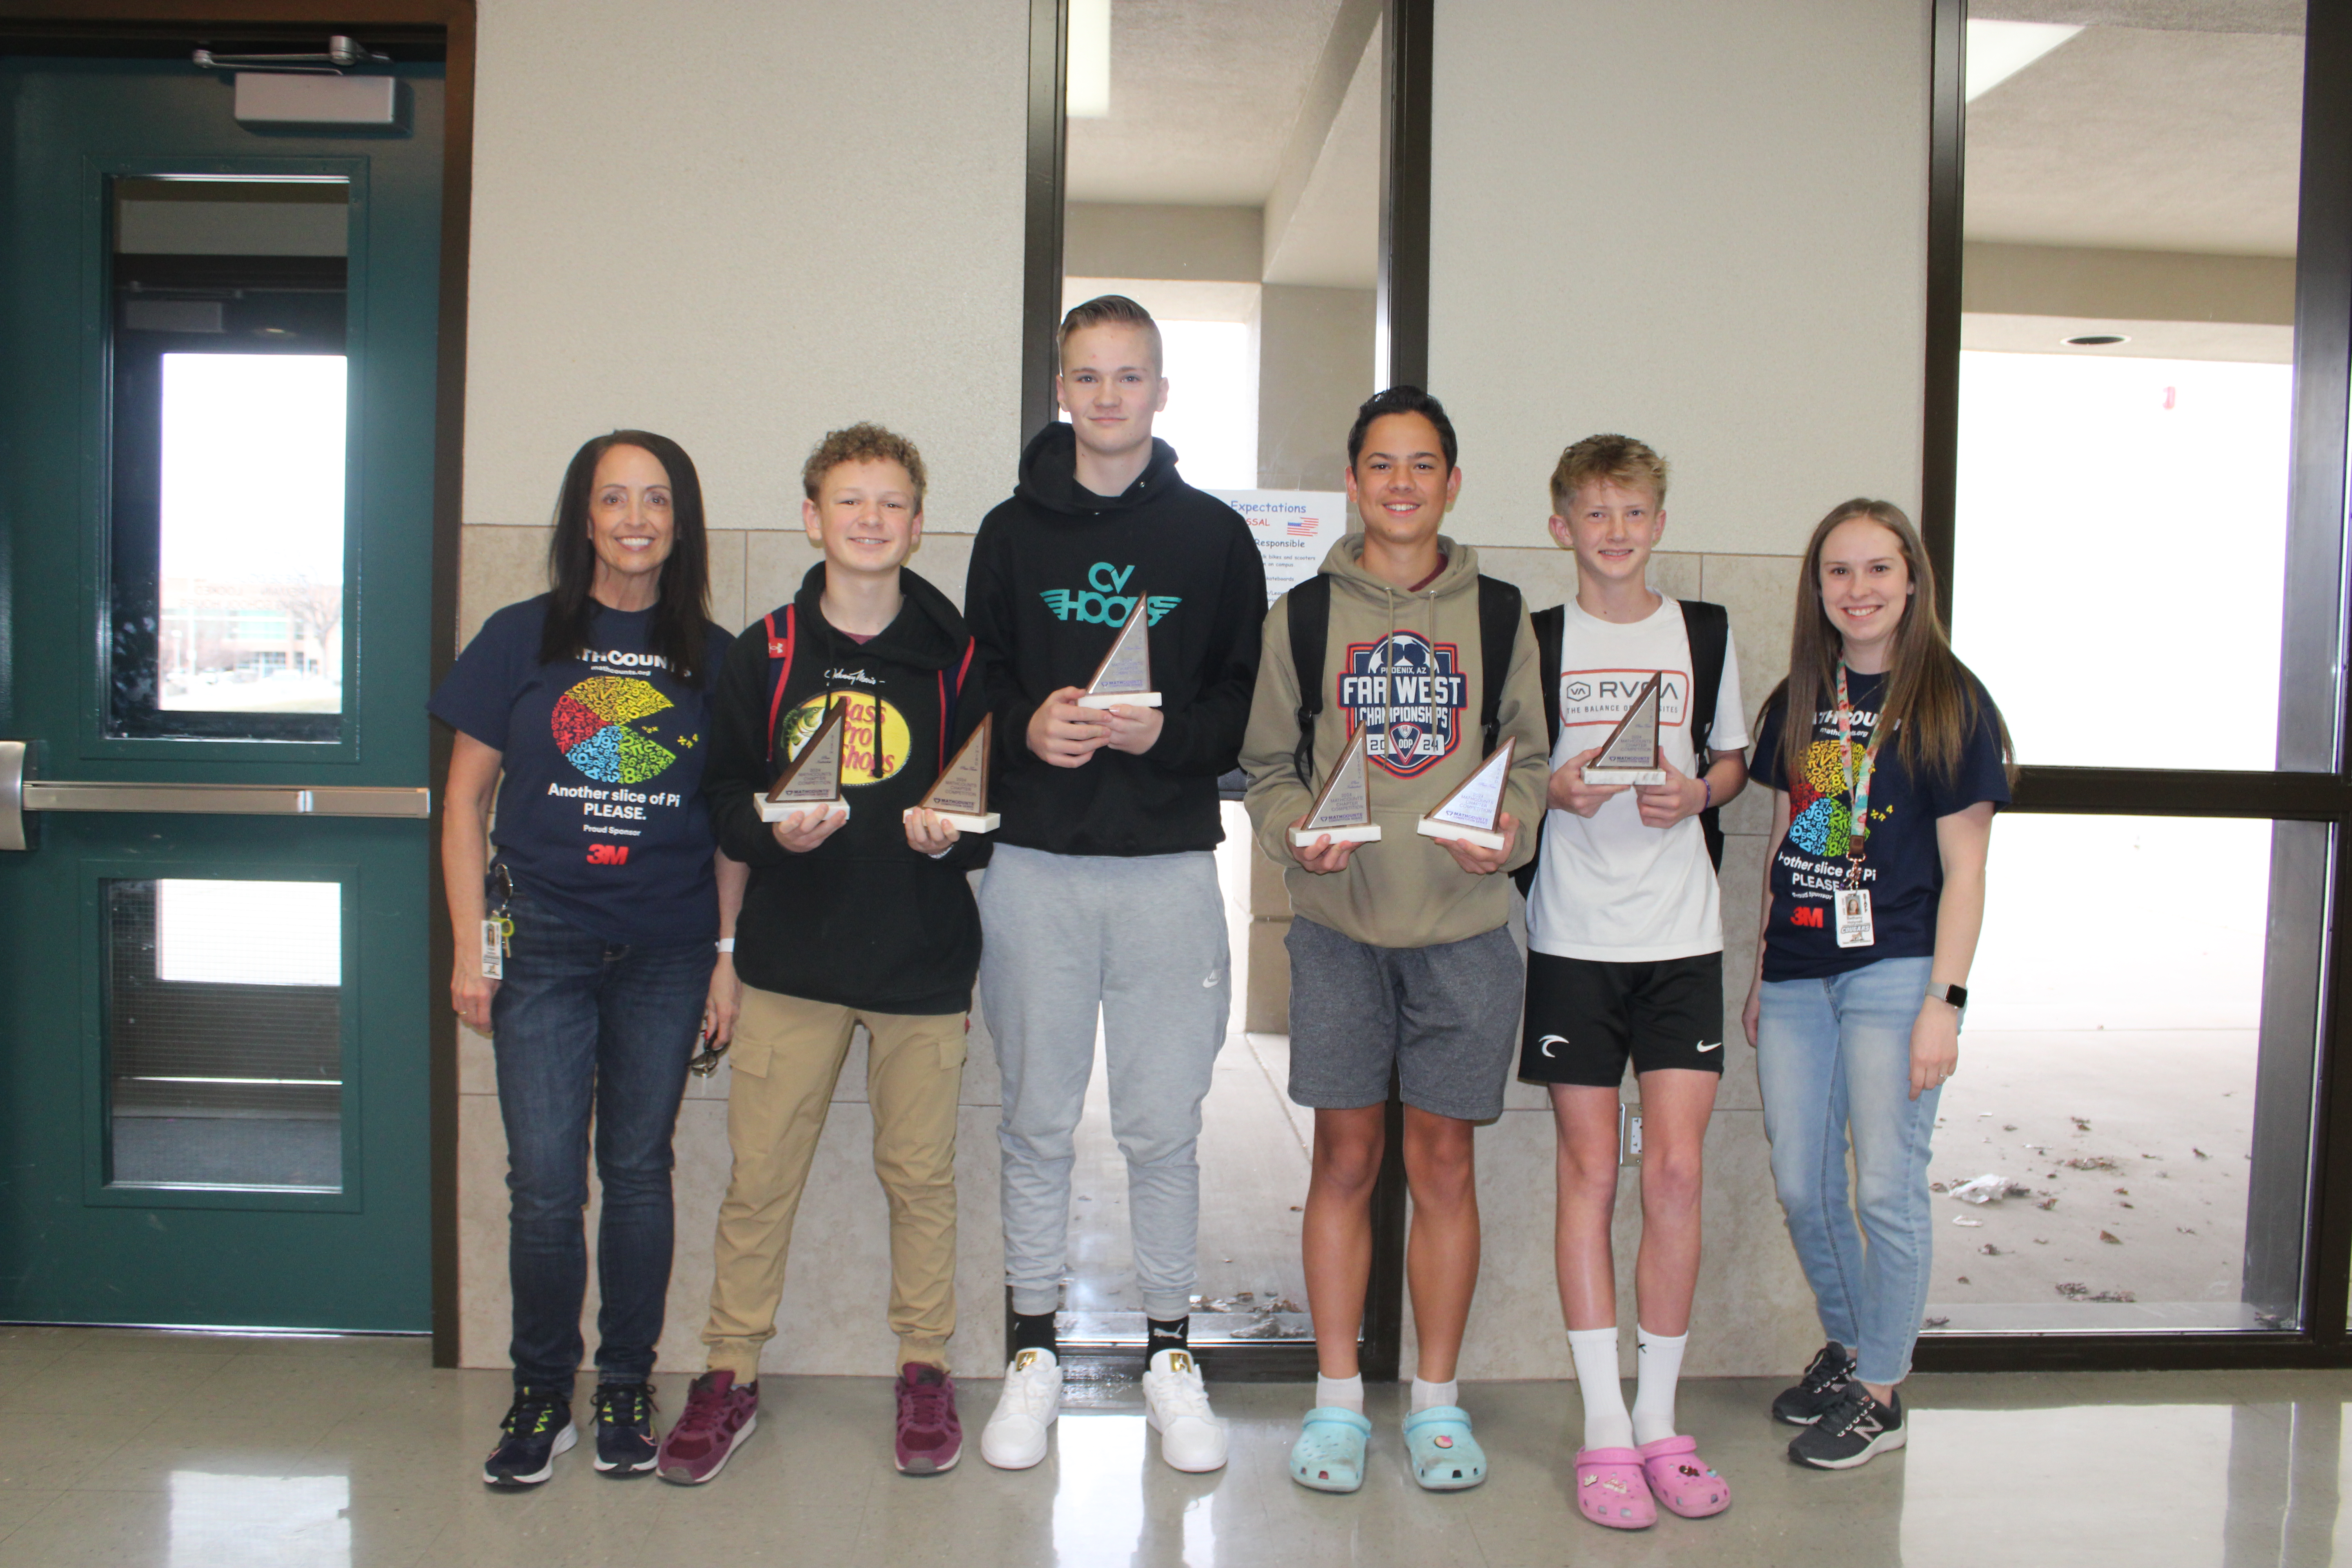 pic of CVMS Math Counts 4th place team